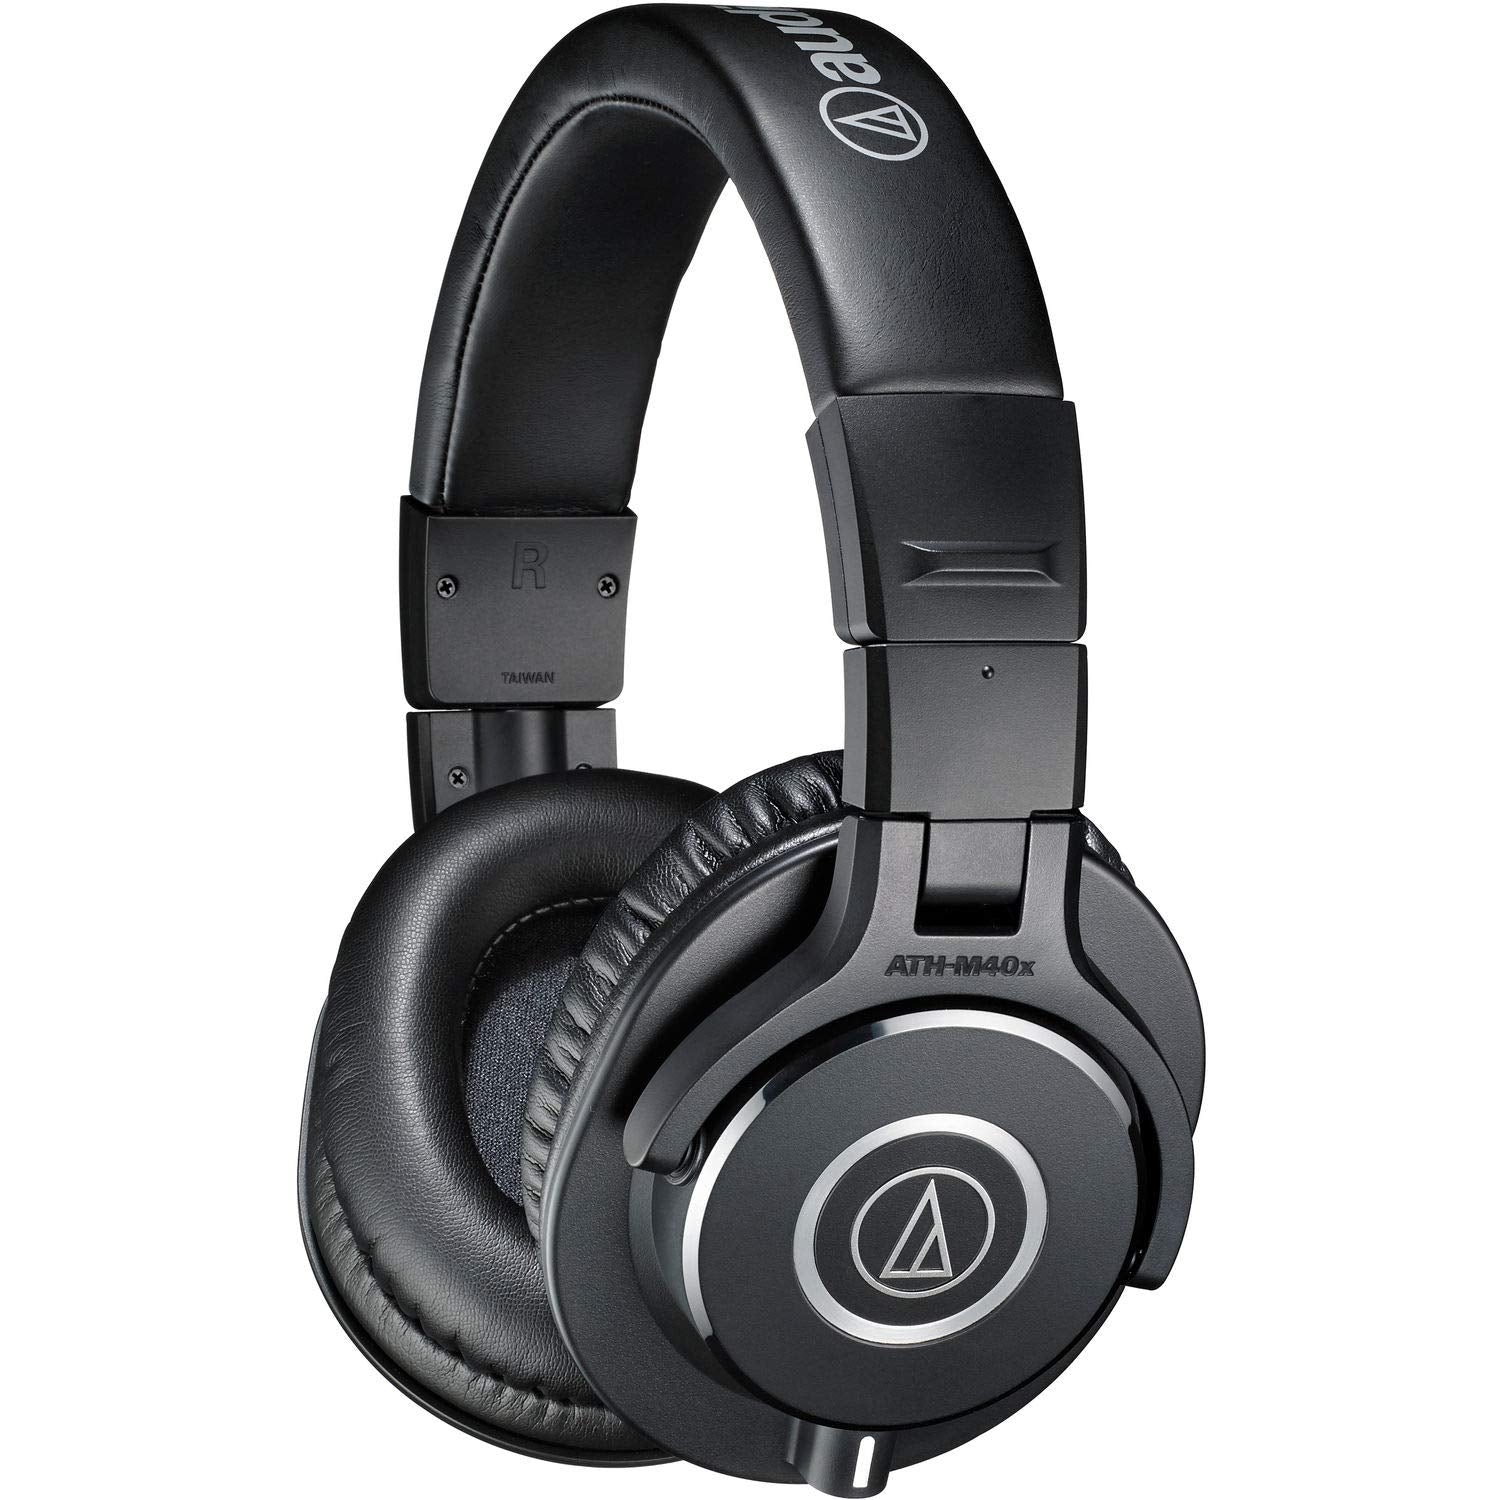 Audio-Technica ATH-M40x Over-Ear Professional Studio Monitor Headphones with 6ave Cleaning Kit, Carrying Case and 1-Year